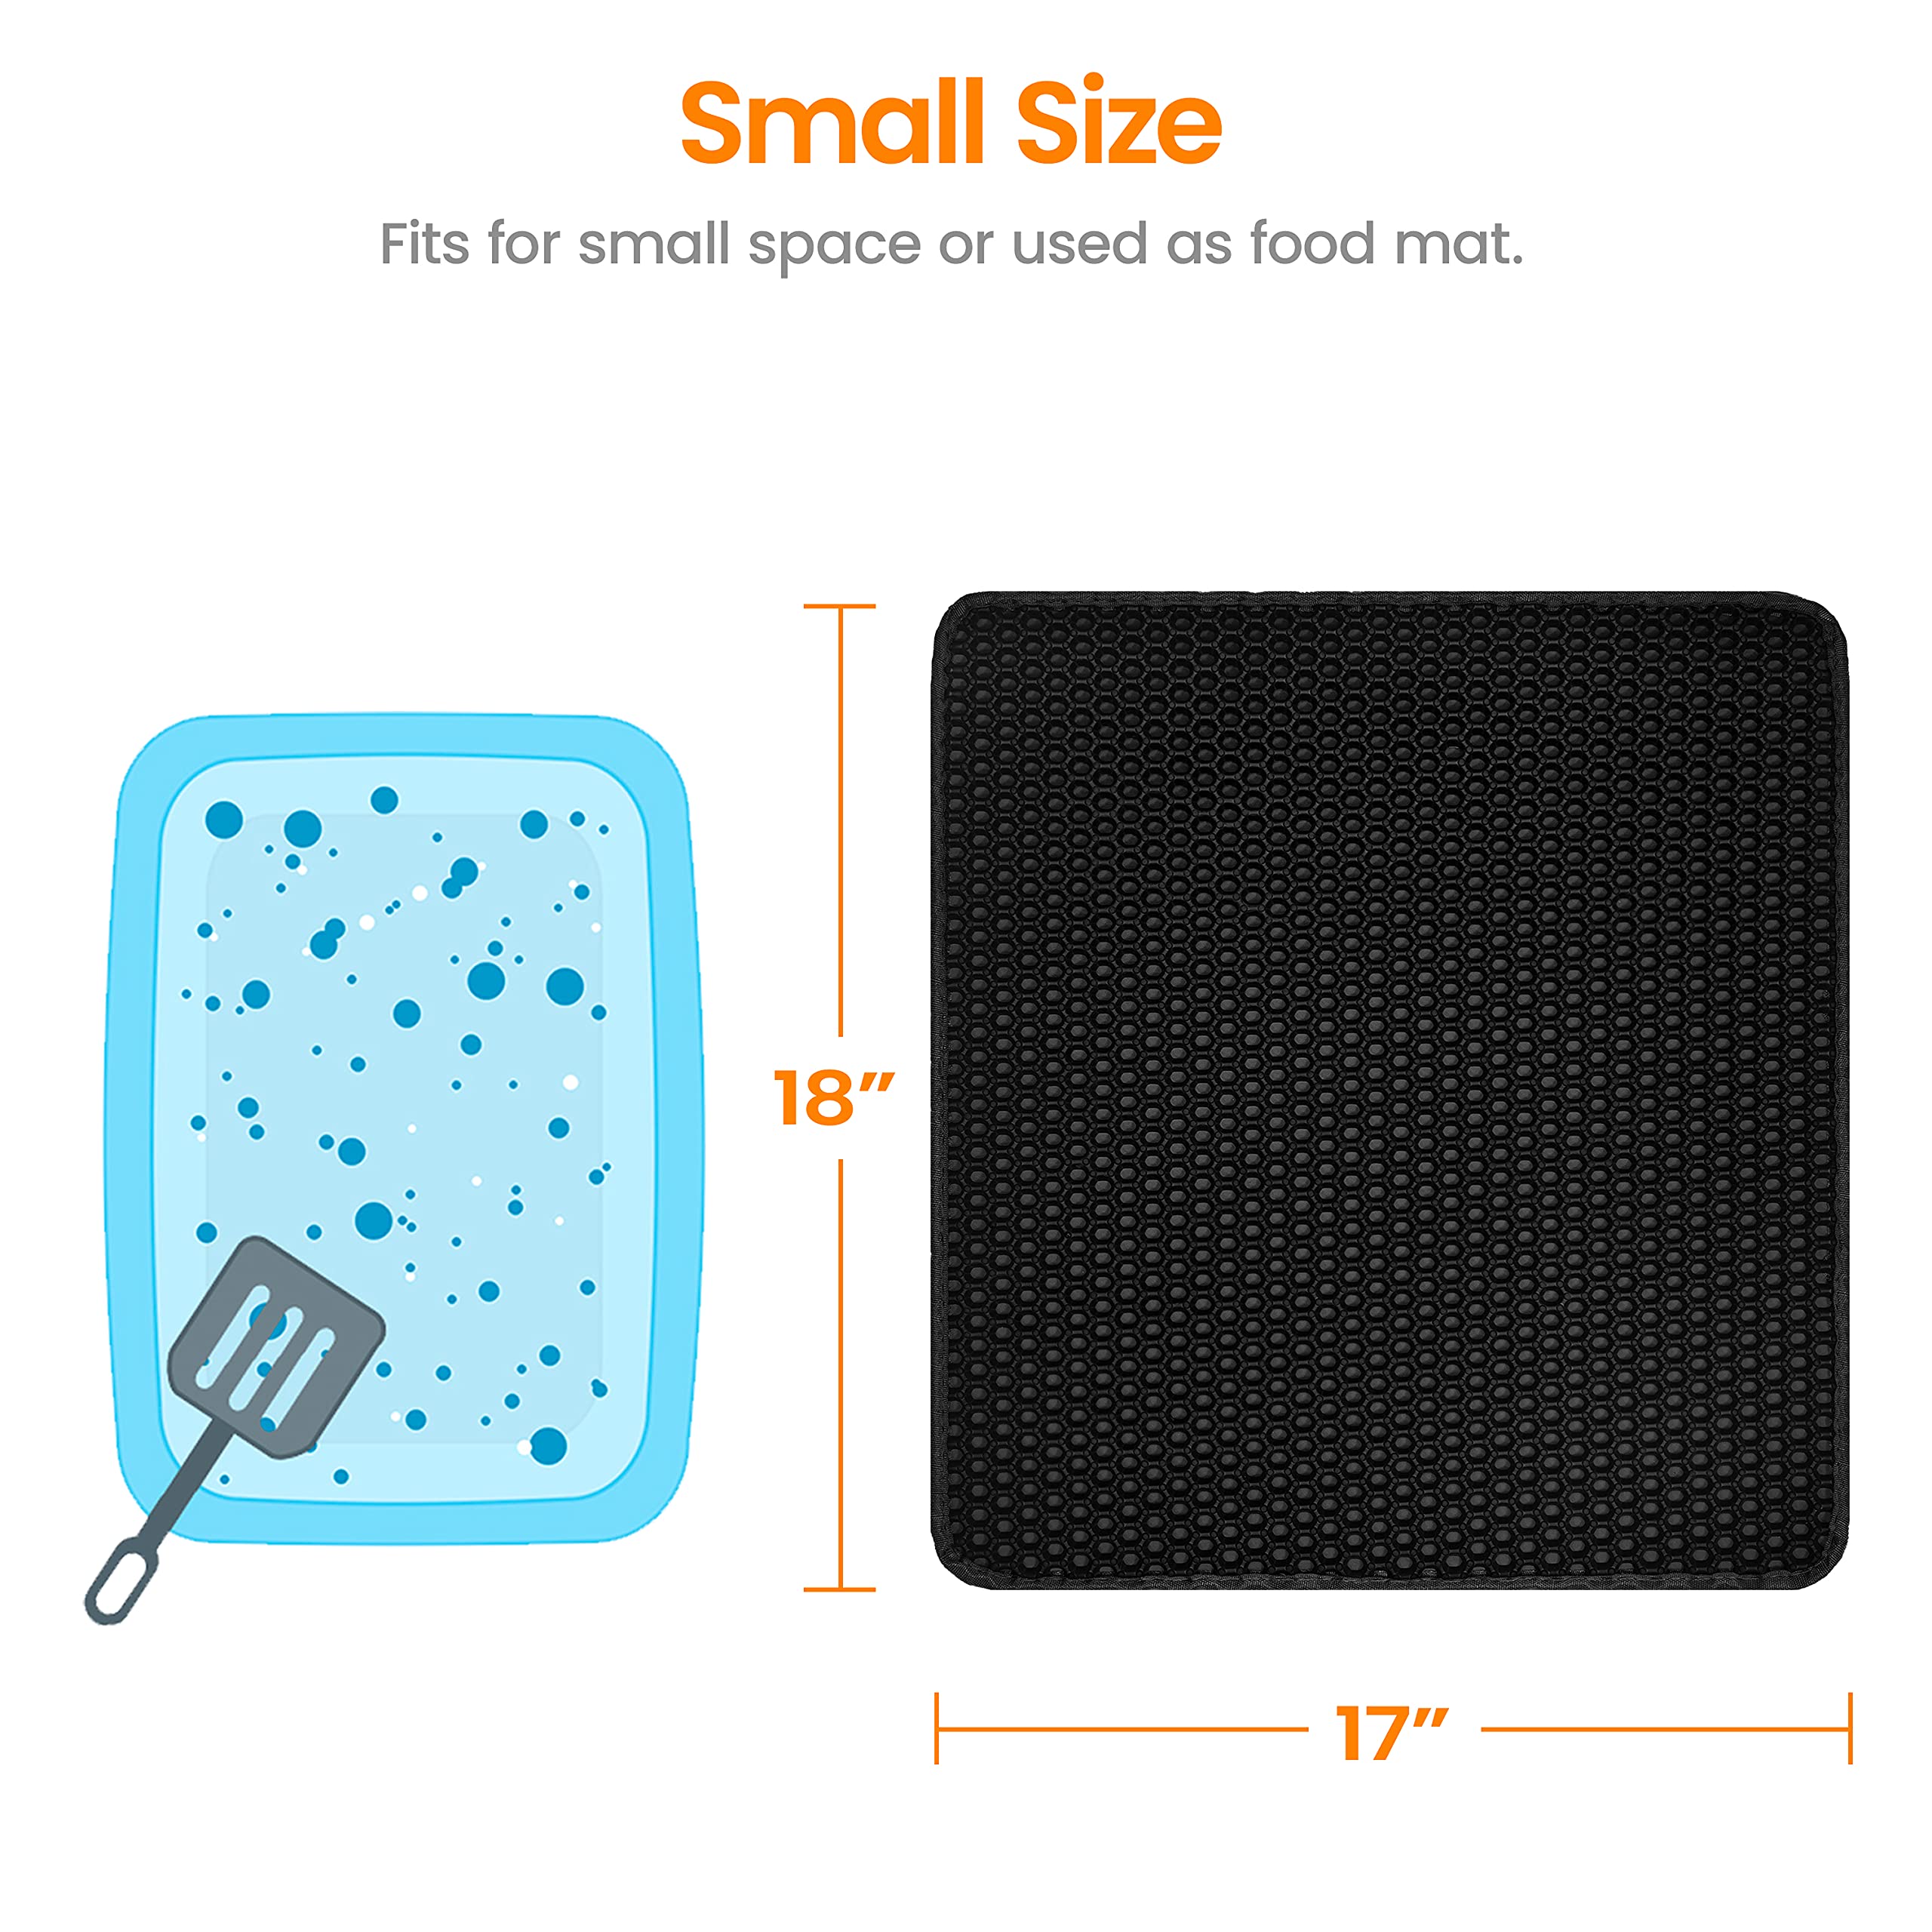 Cat Litter Mat, Kitty Litter Trapping Mat, Honeycomb Double Layer Mats,  Urine Waterproof, Easy Clean, Scatter Control, Catcher Litter Tray Box Rug  Carpet,litter Trapping Mat With Honeycomb Double Layer  Design-waterproof-easy To Clean